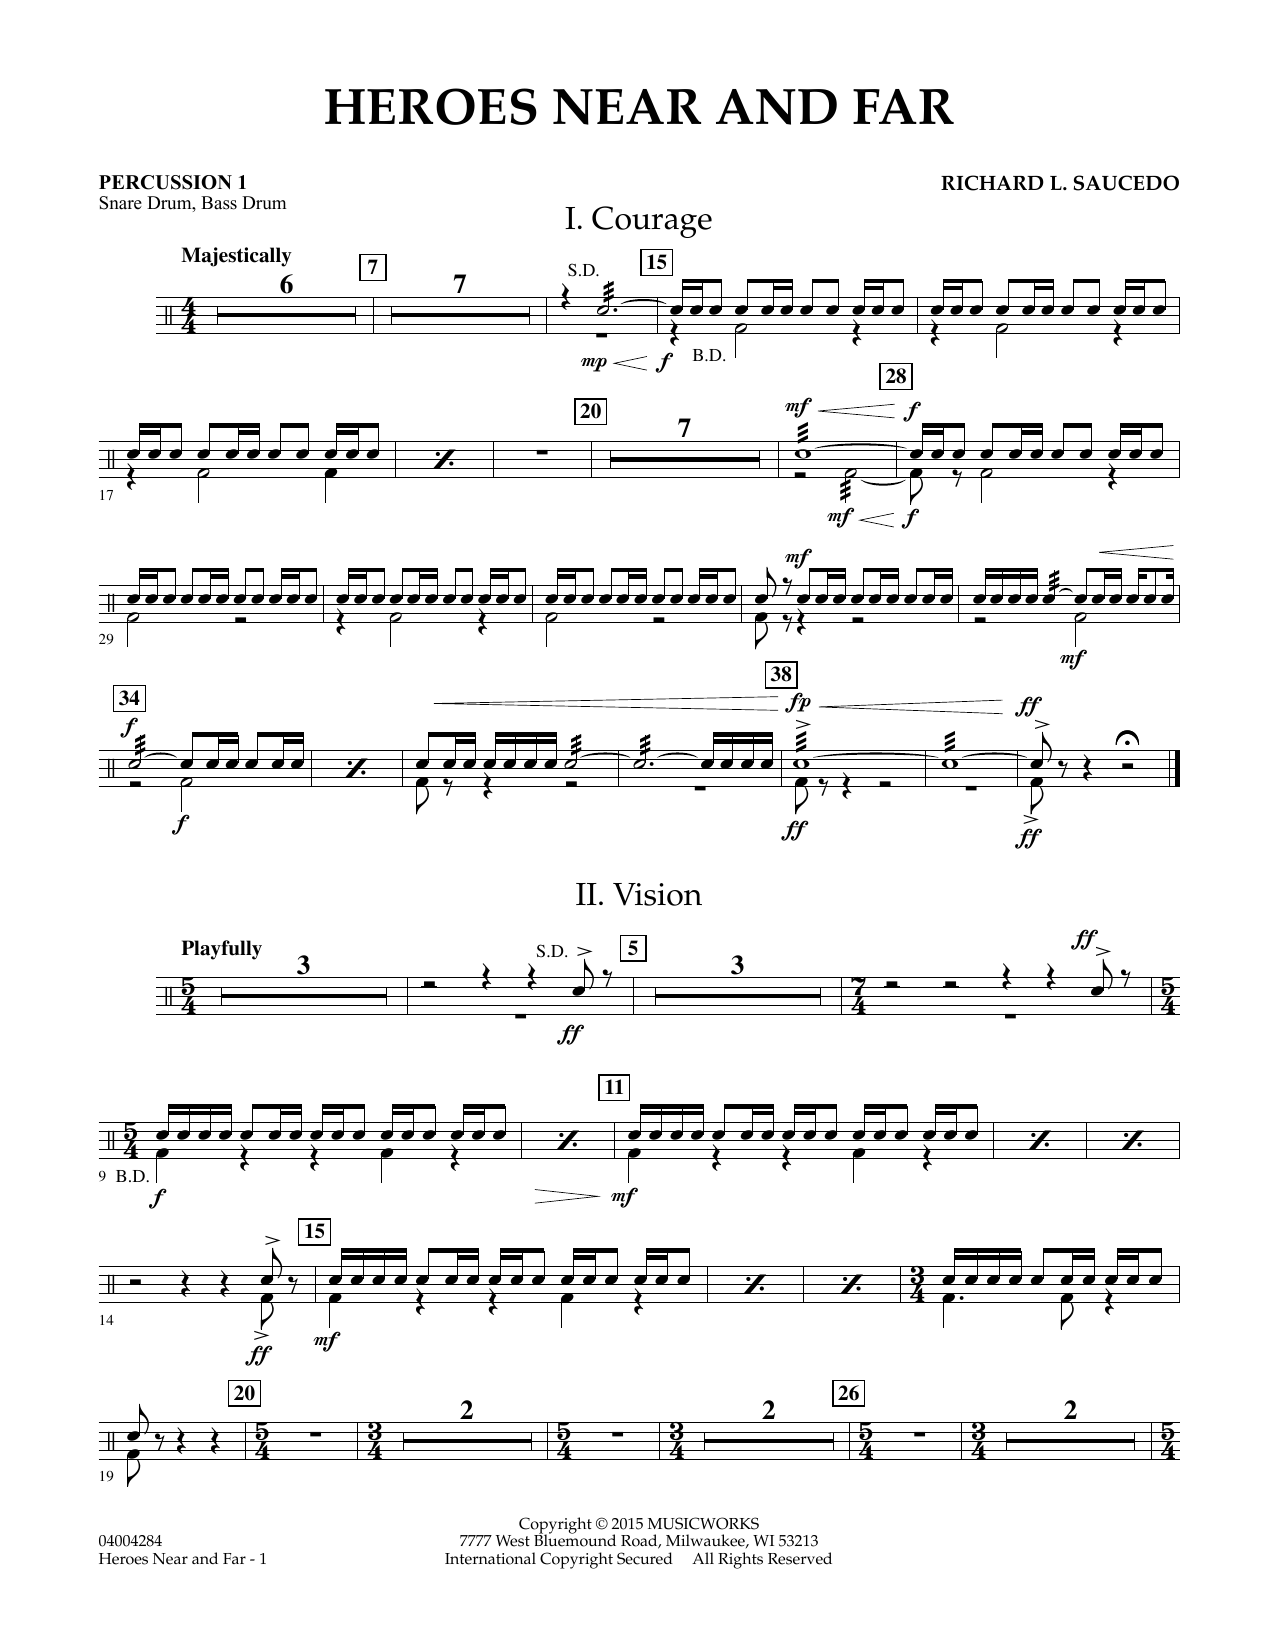 Richard L. Saucedo Heroes Near and Far - Percussion 1 sheet music notes and chords. Download Printable PDF.